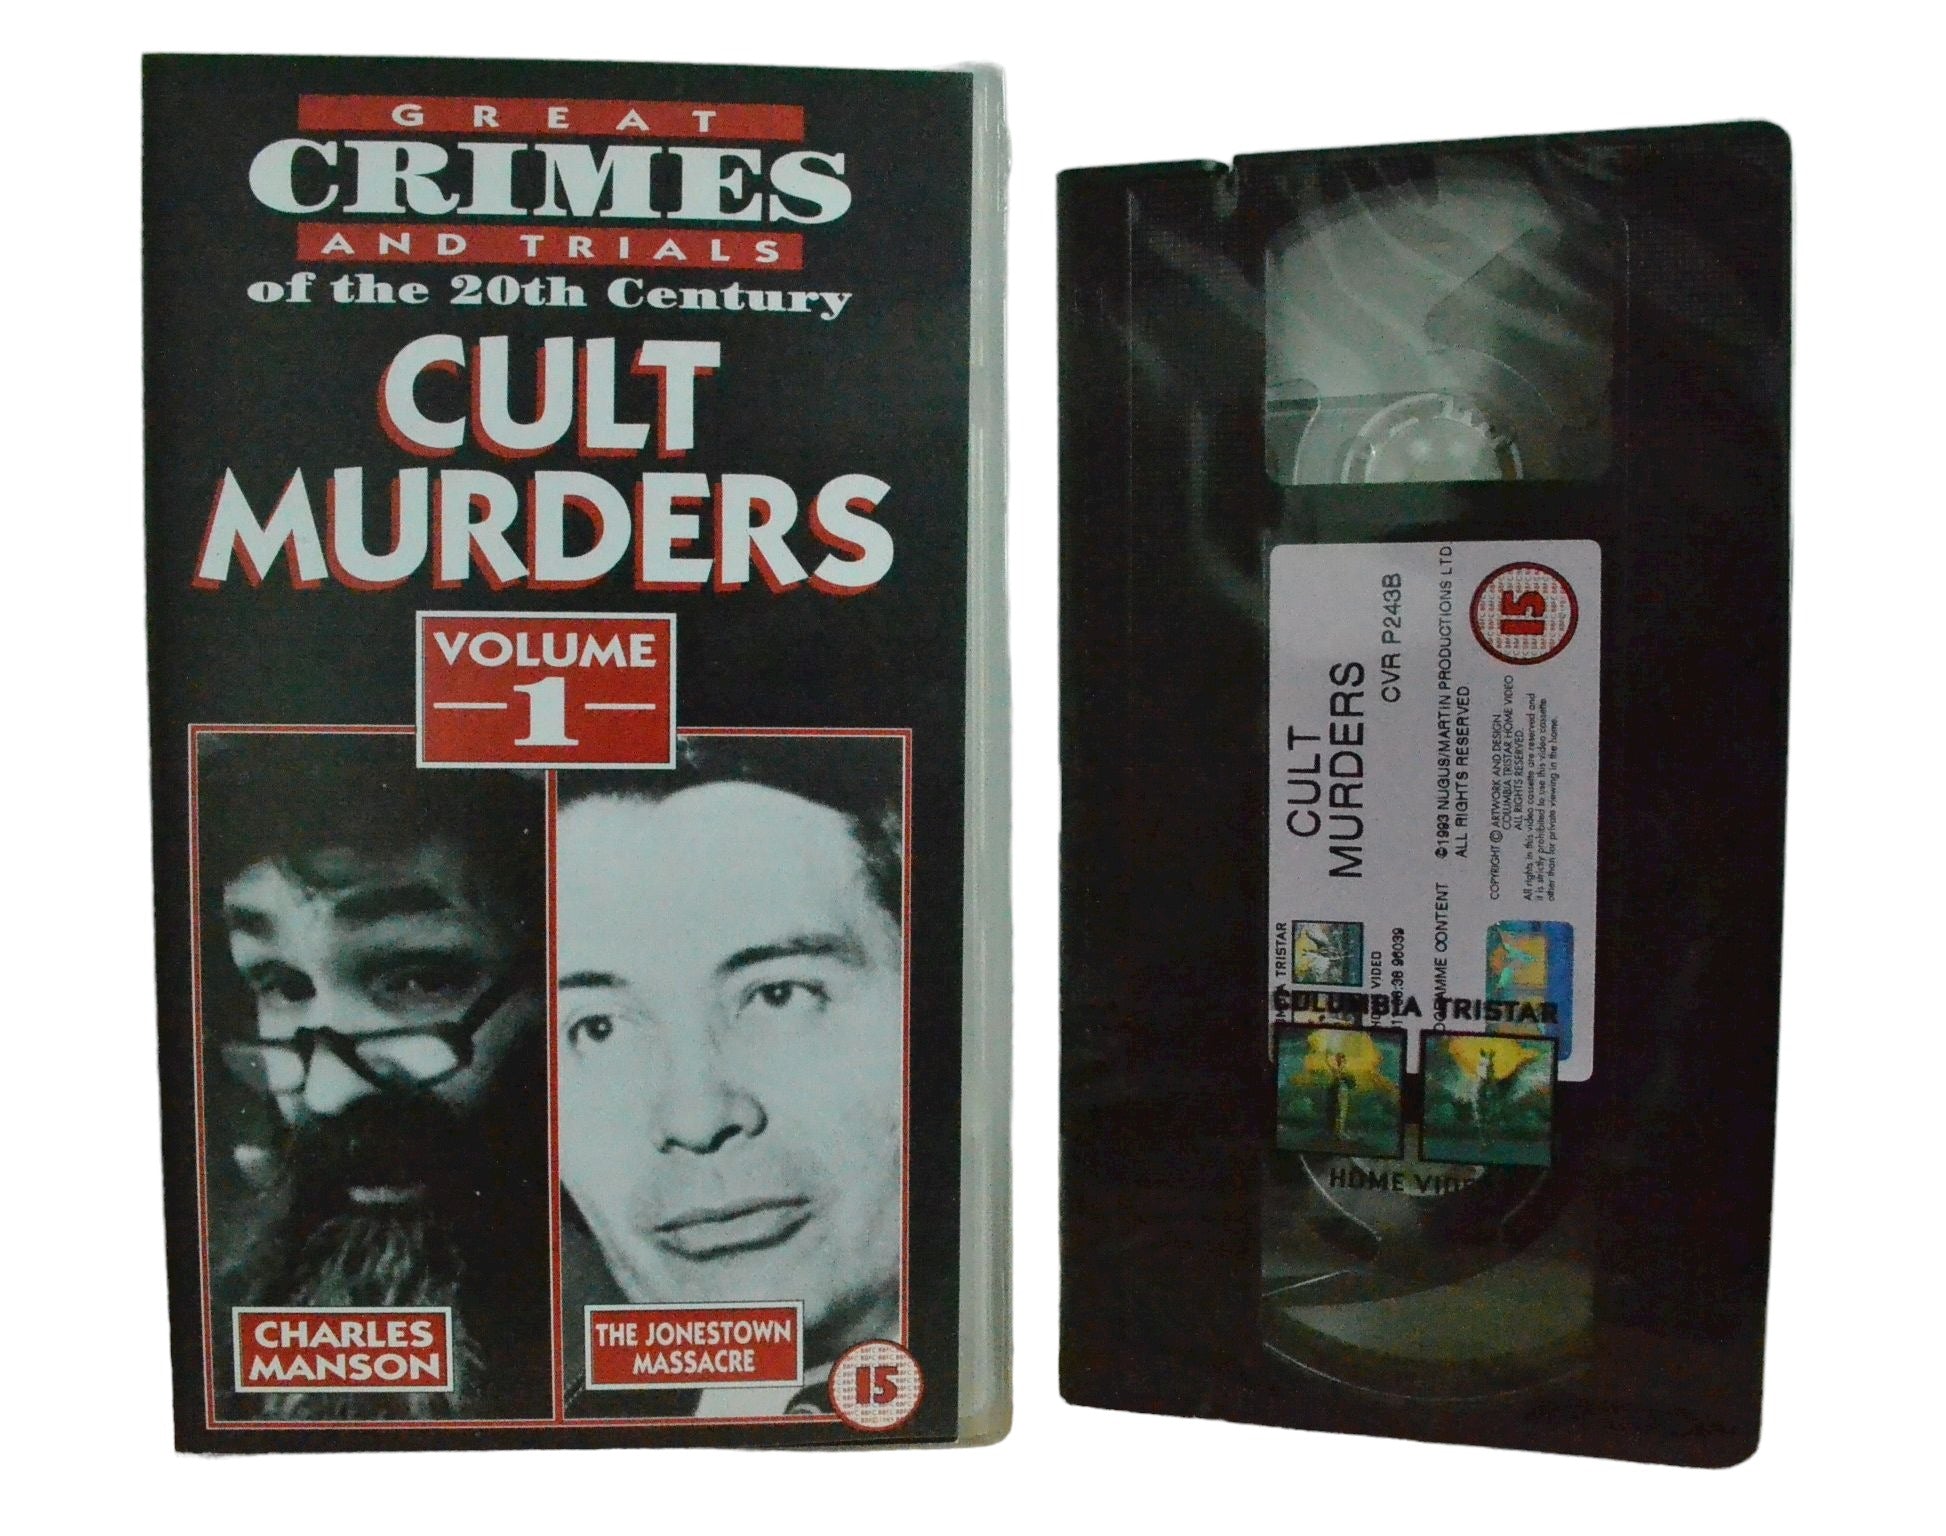 Cult Murders - Volume 1 - Charles Manson - Columbia Tristar Home Entertainment - Brand New Sealed - Pal VHS-